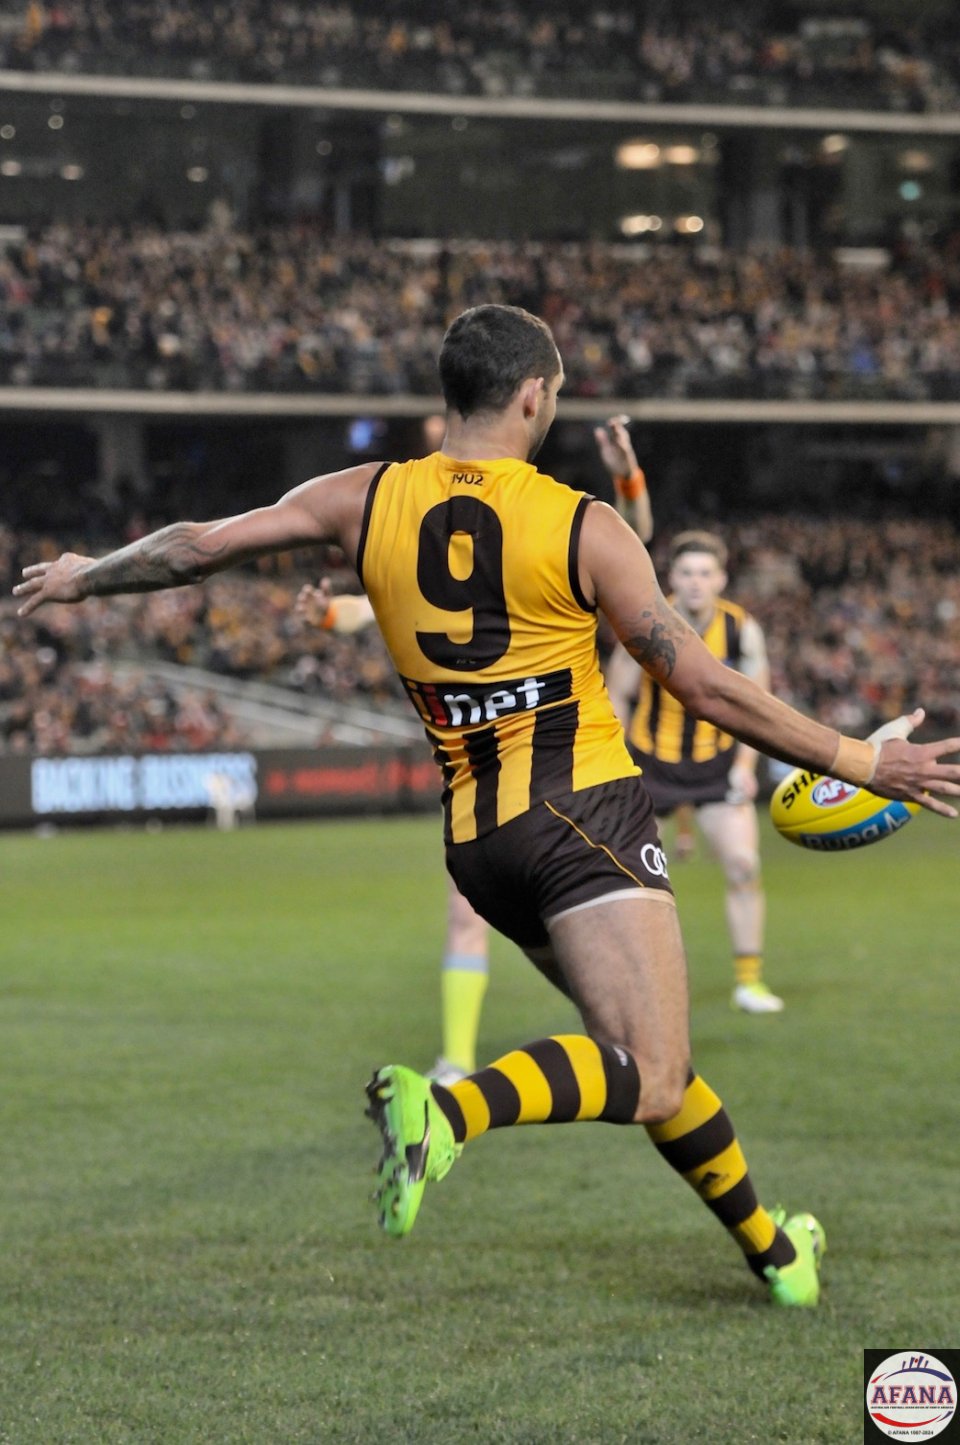 Silky smooth skills from the 300 game premiership player as he scores